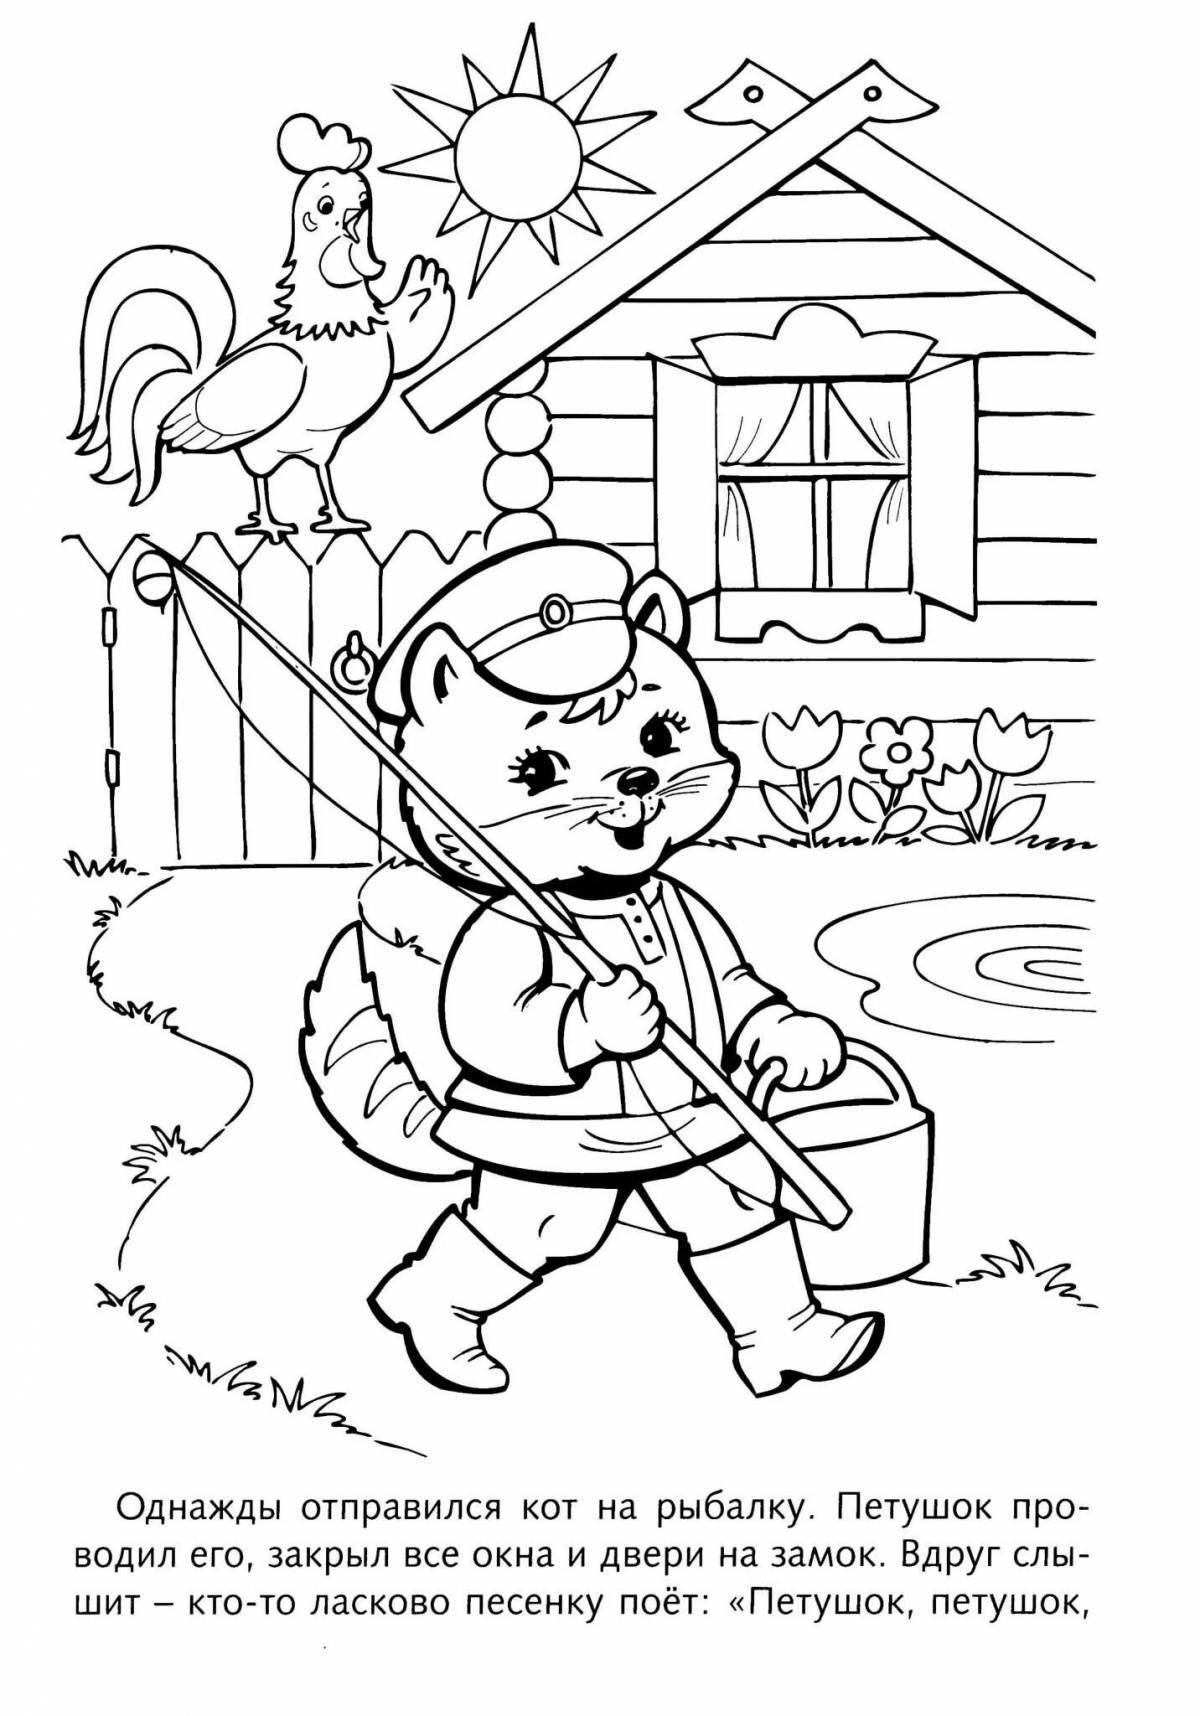 Cute cat and rooster coloring page